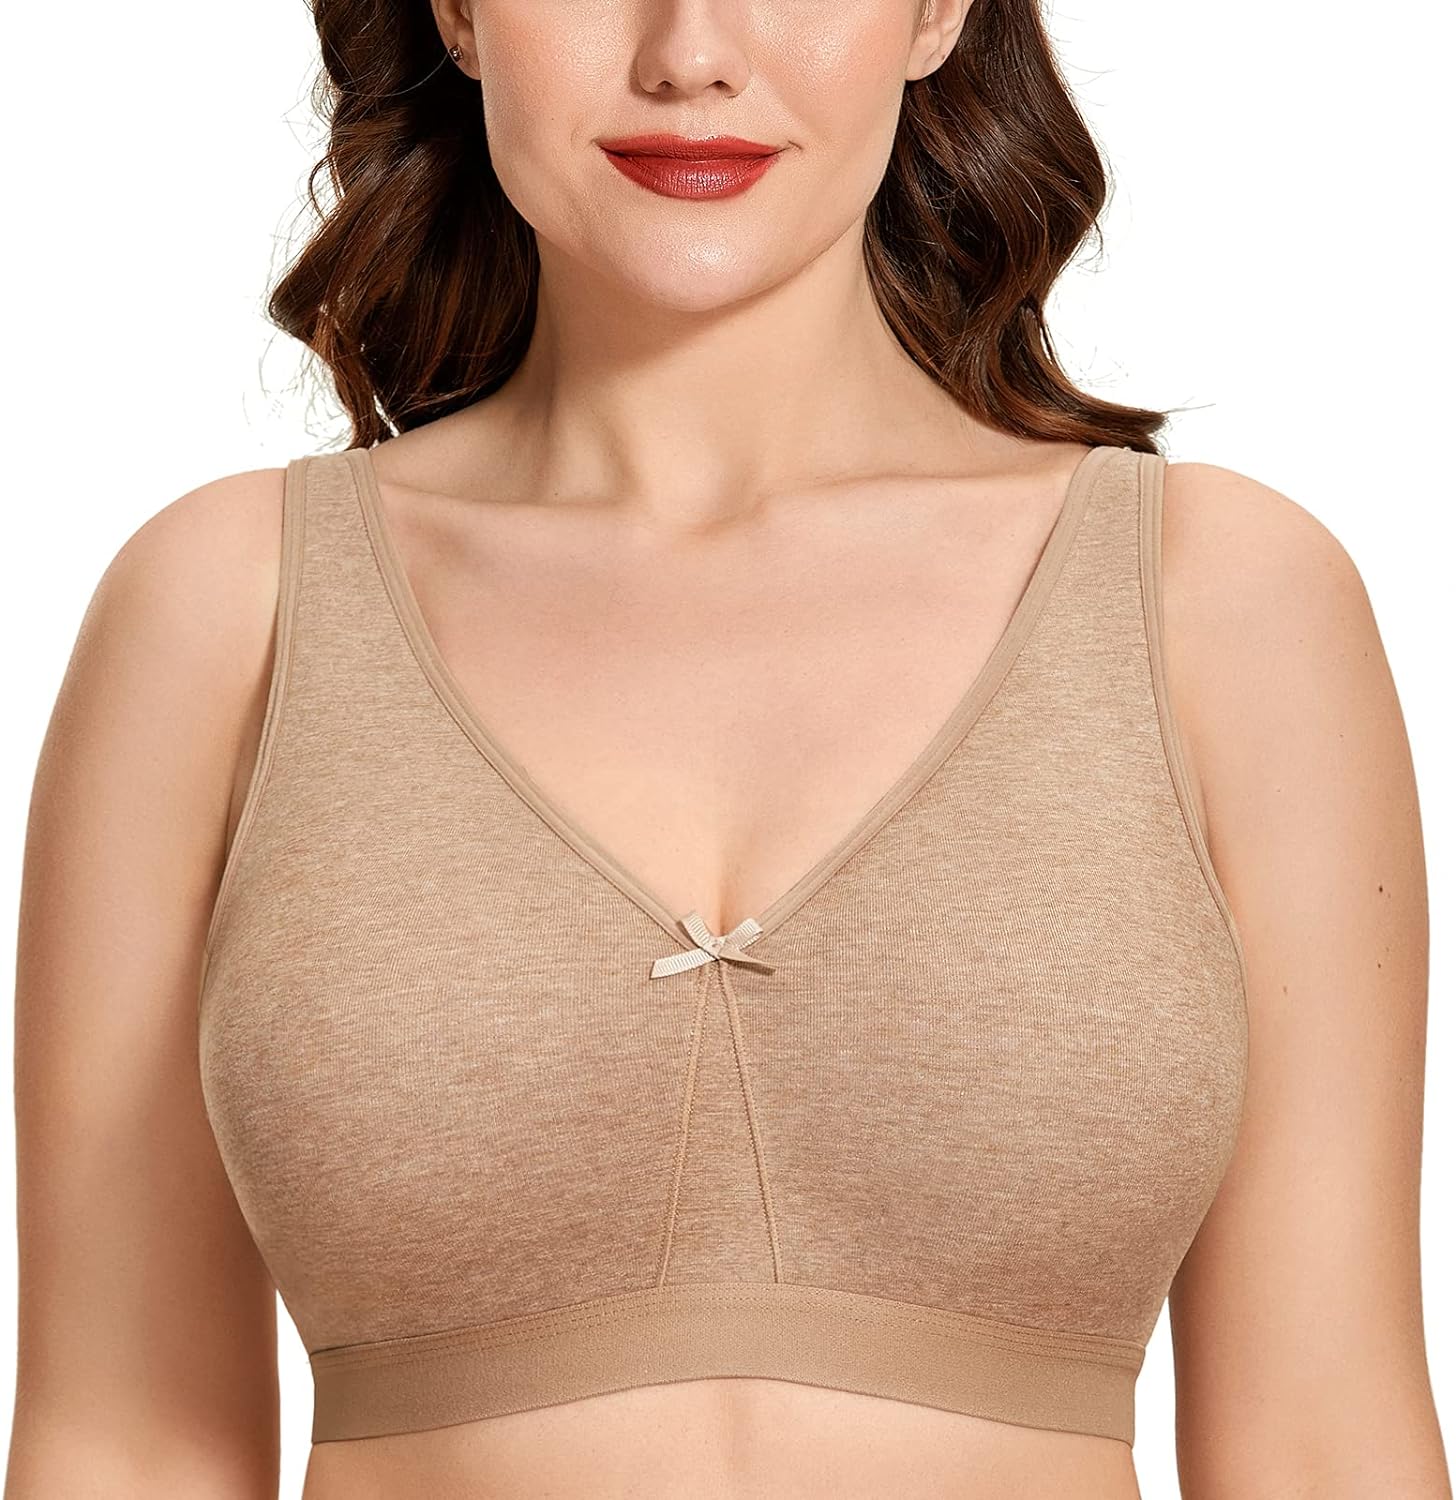 AISILIN Women's Non Wired Bras Full Cup Plus Size Cotton No Padding Sleep  Comfort Wireless